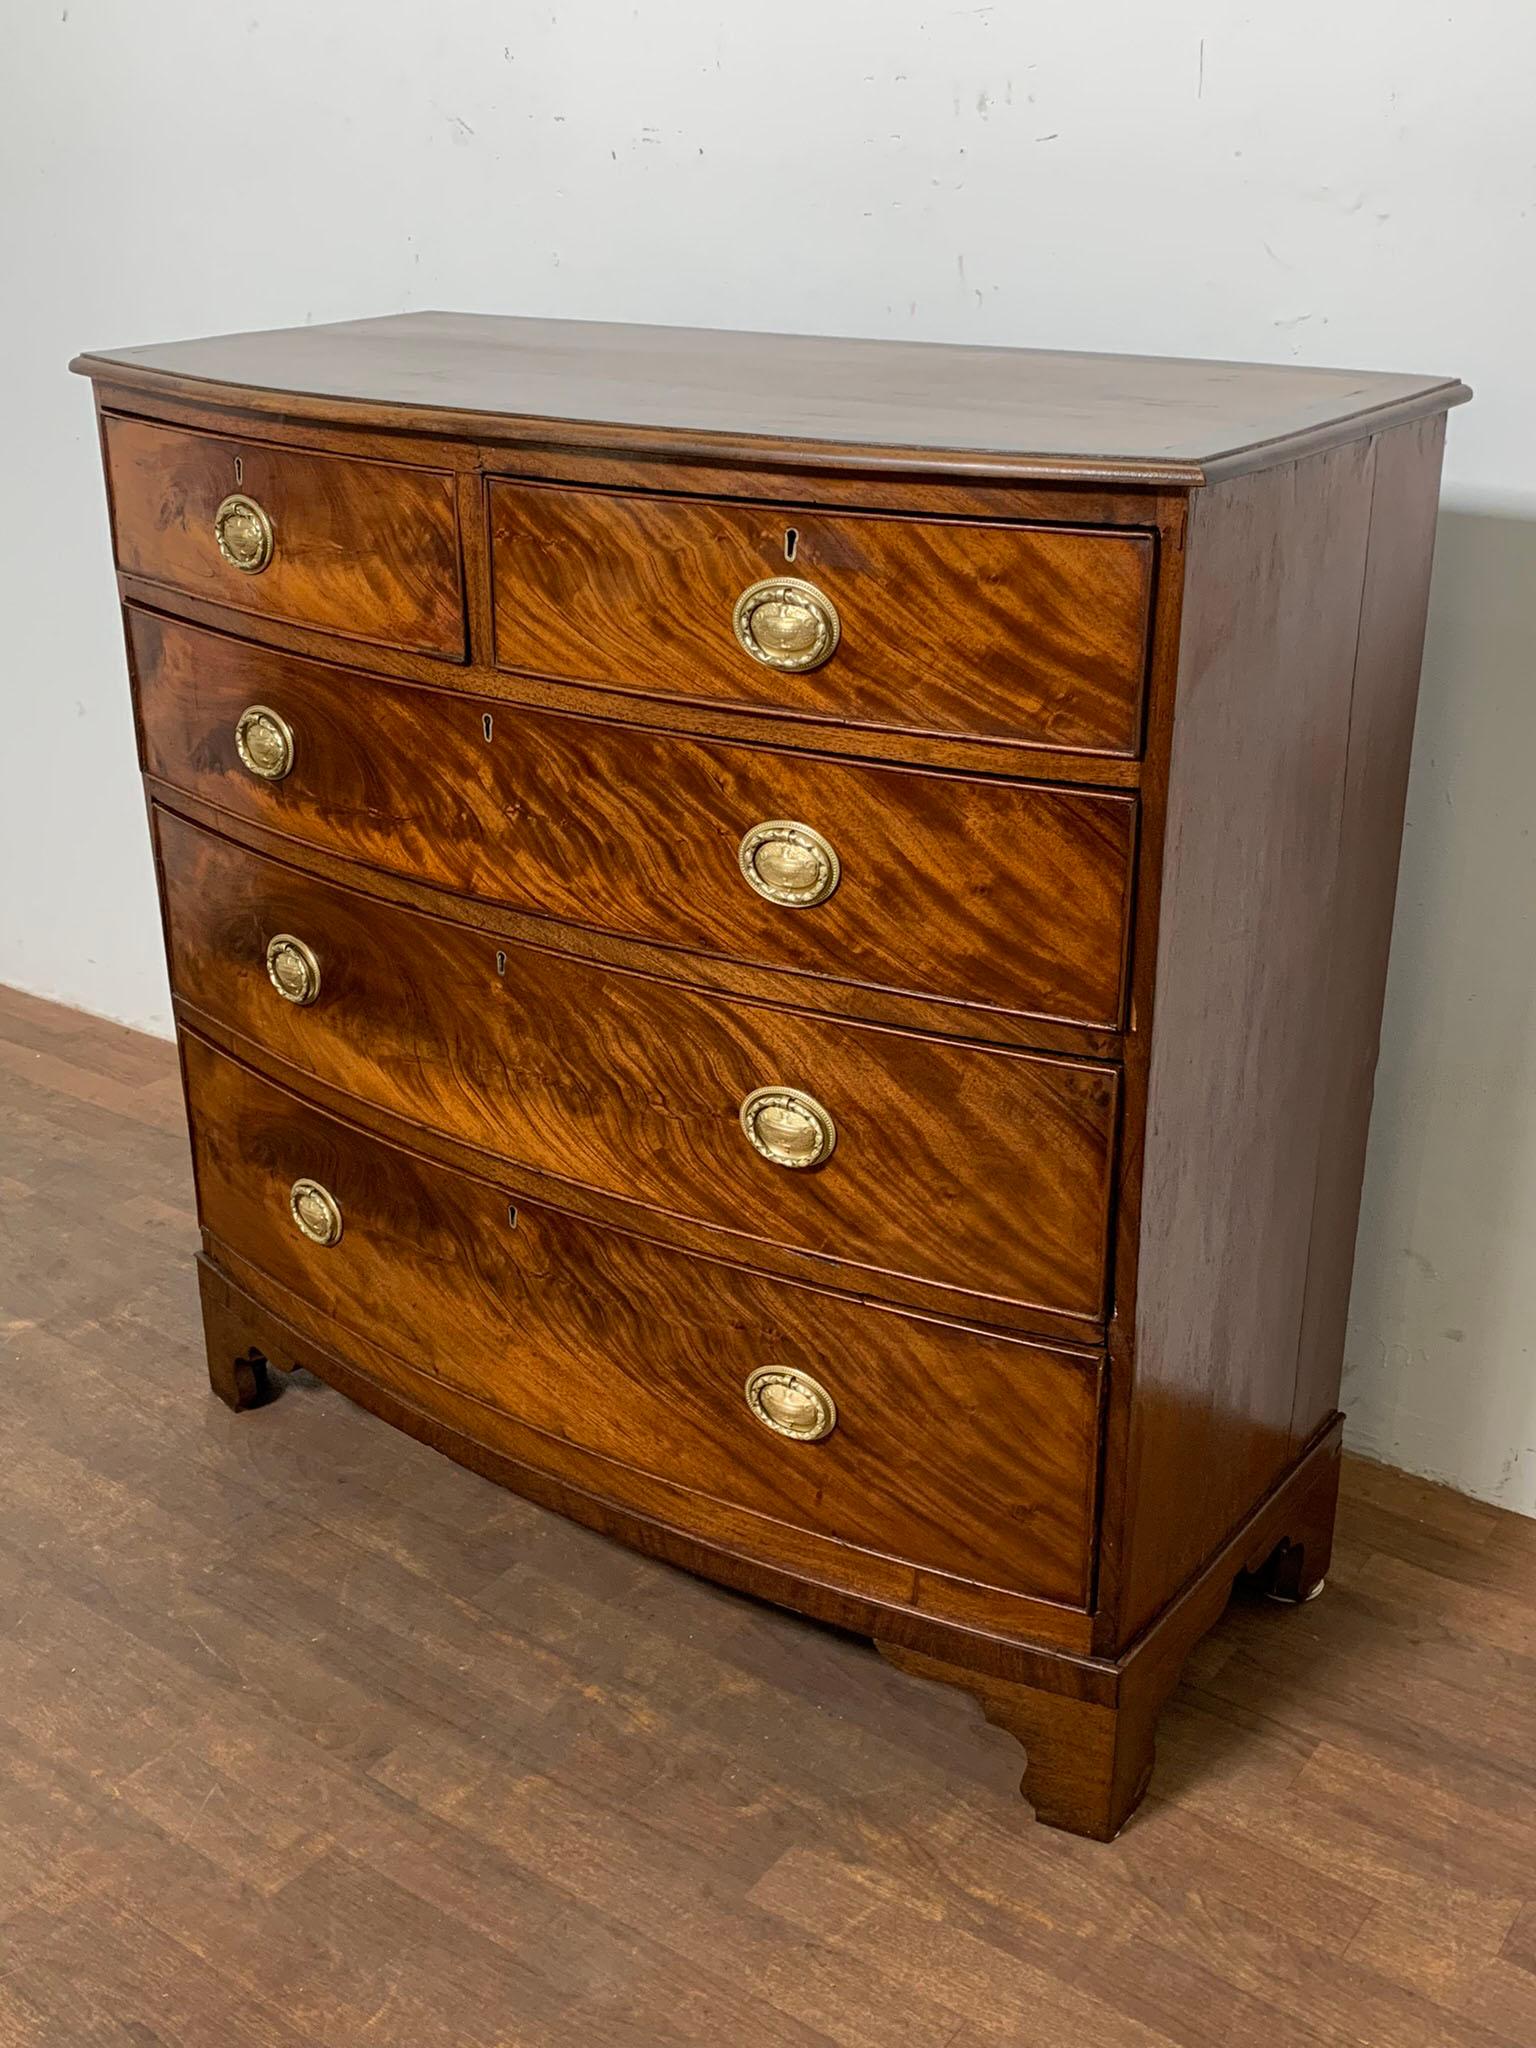 A George III era bow front chest of two over three graduated drawers in flame mahogany, made in England ca. 1800. Bears the stamp of the original early 19th century London distributor.